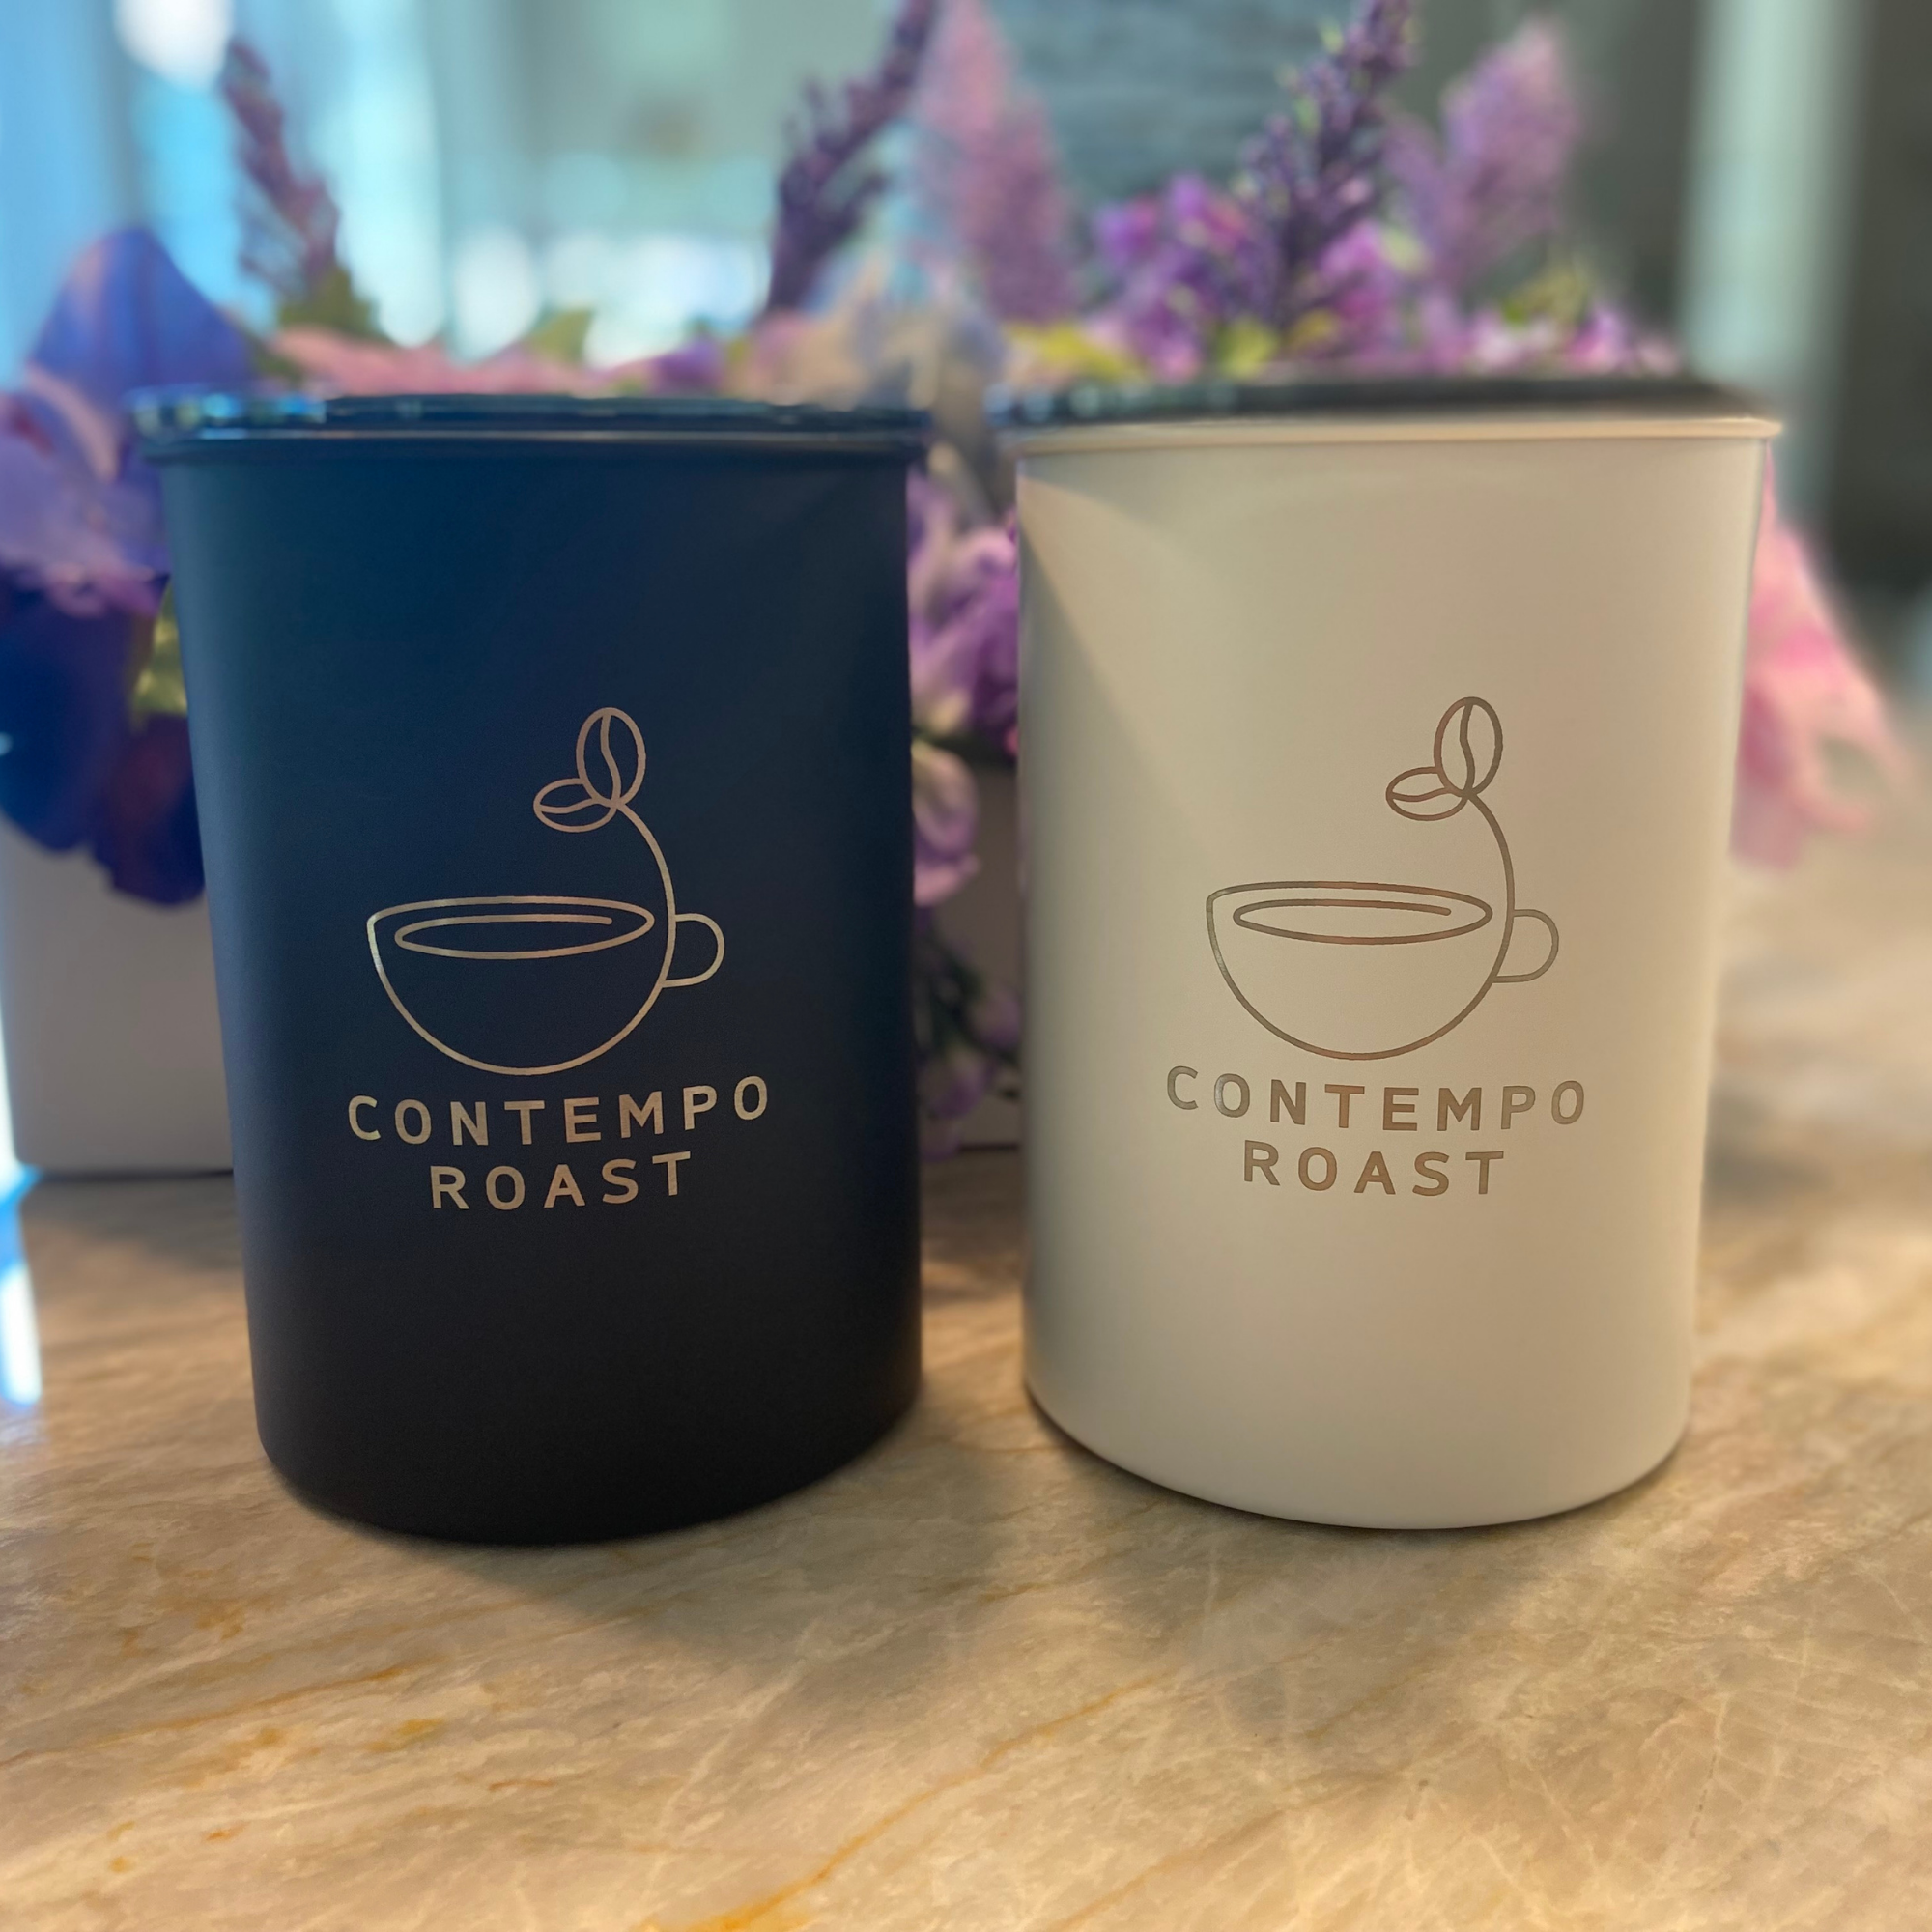 matte black and matte white canisters, both etched with the ContempoRoast logo, sitting side-by-side on a counter in front of purple flowers